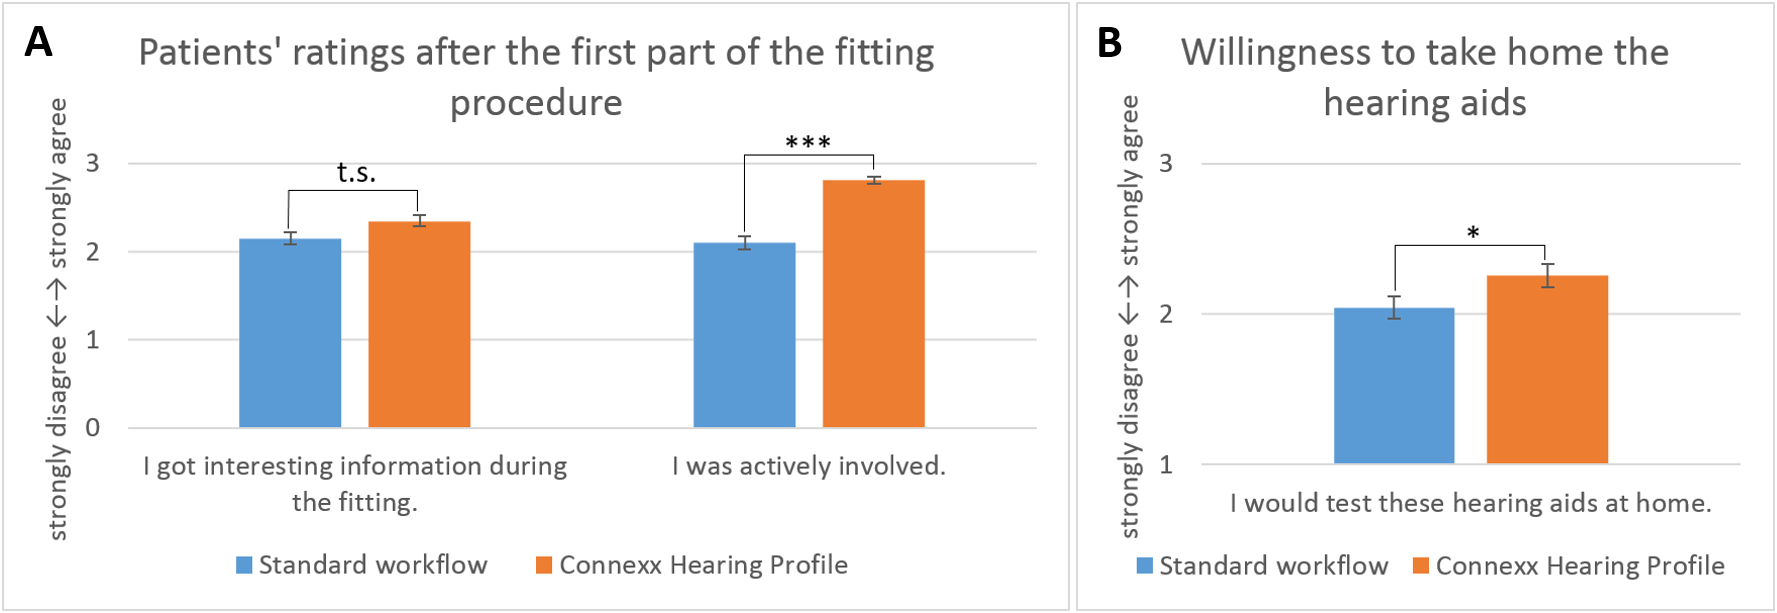 Patients‘ ratings of the standard workflow and the Connexx Hearing Profile